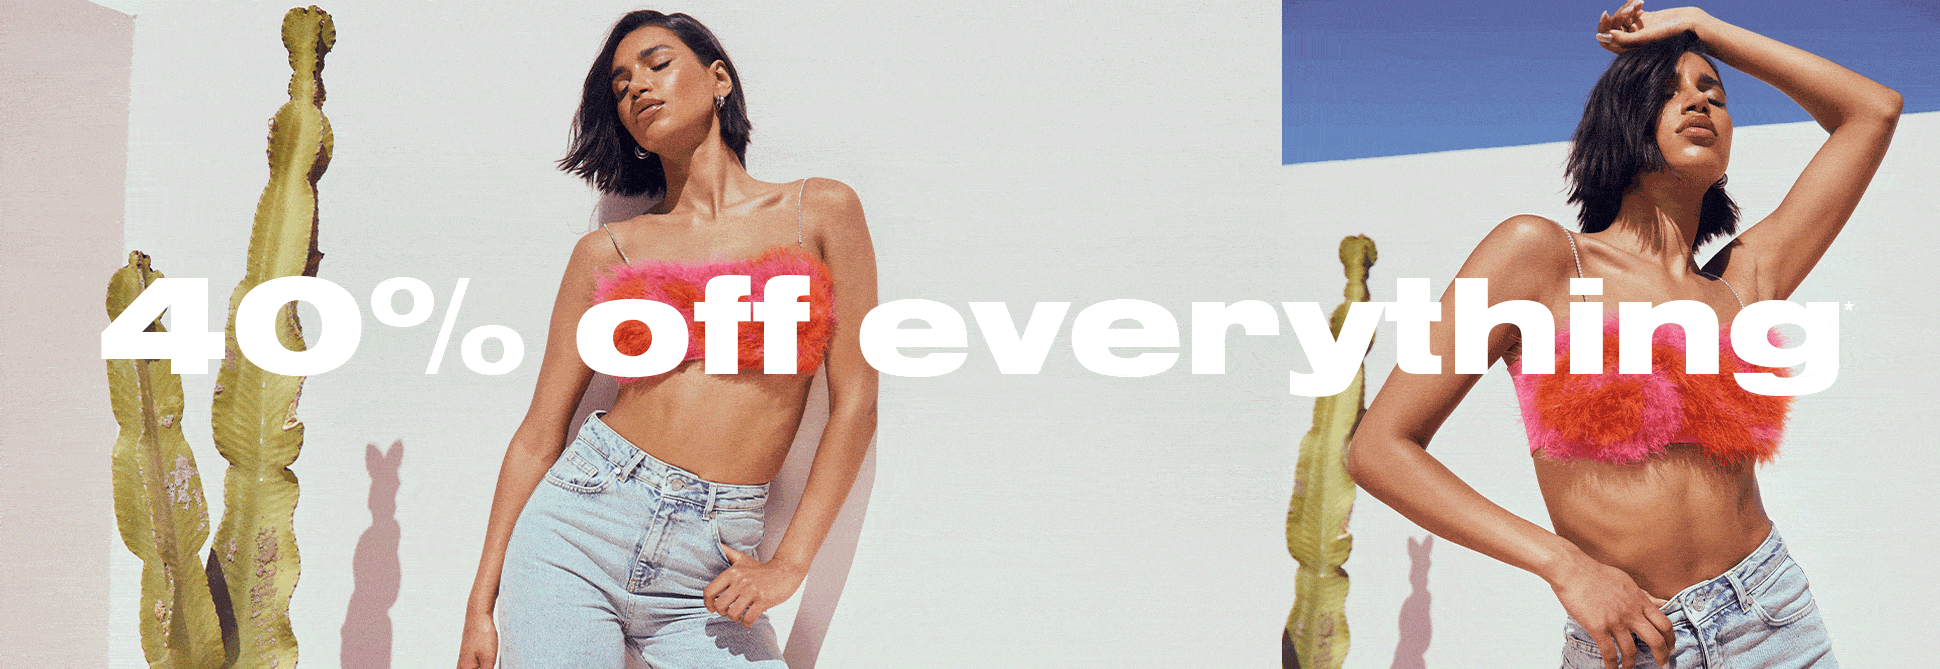 40% off everything!